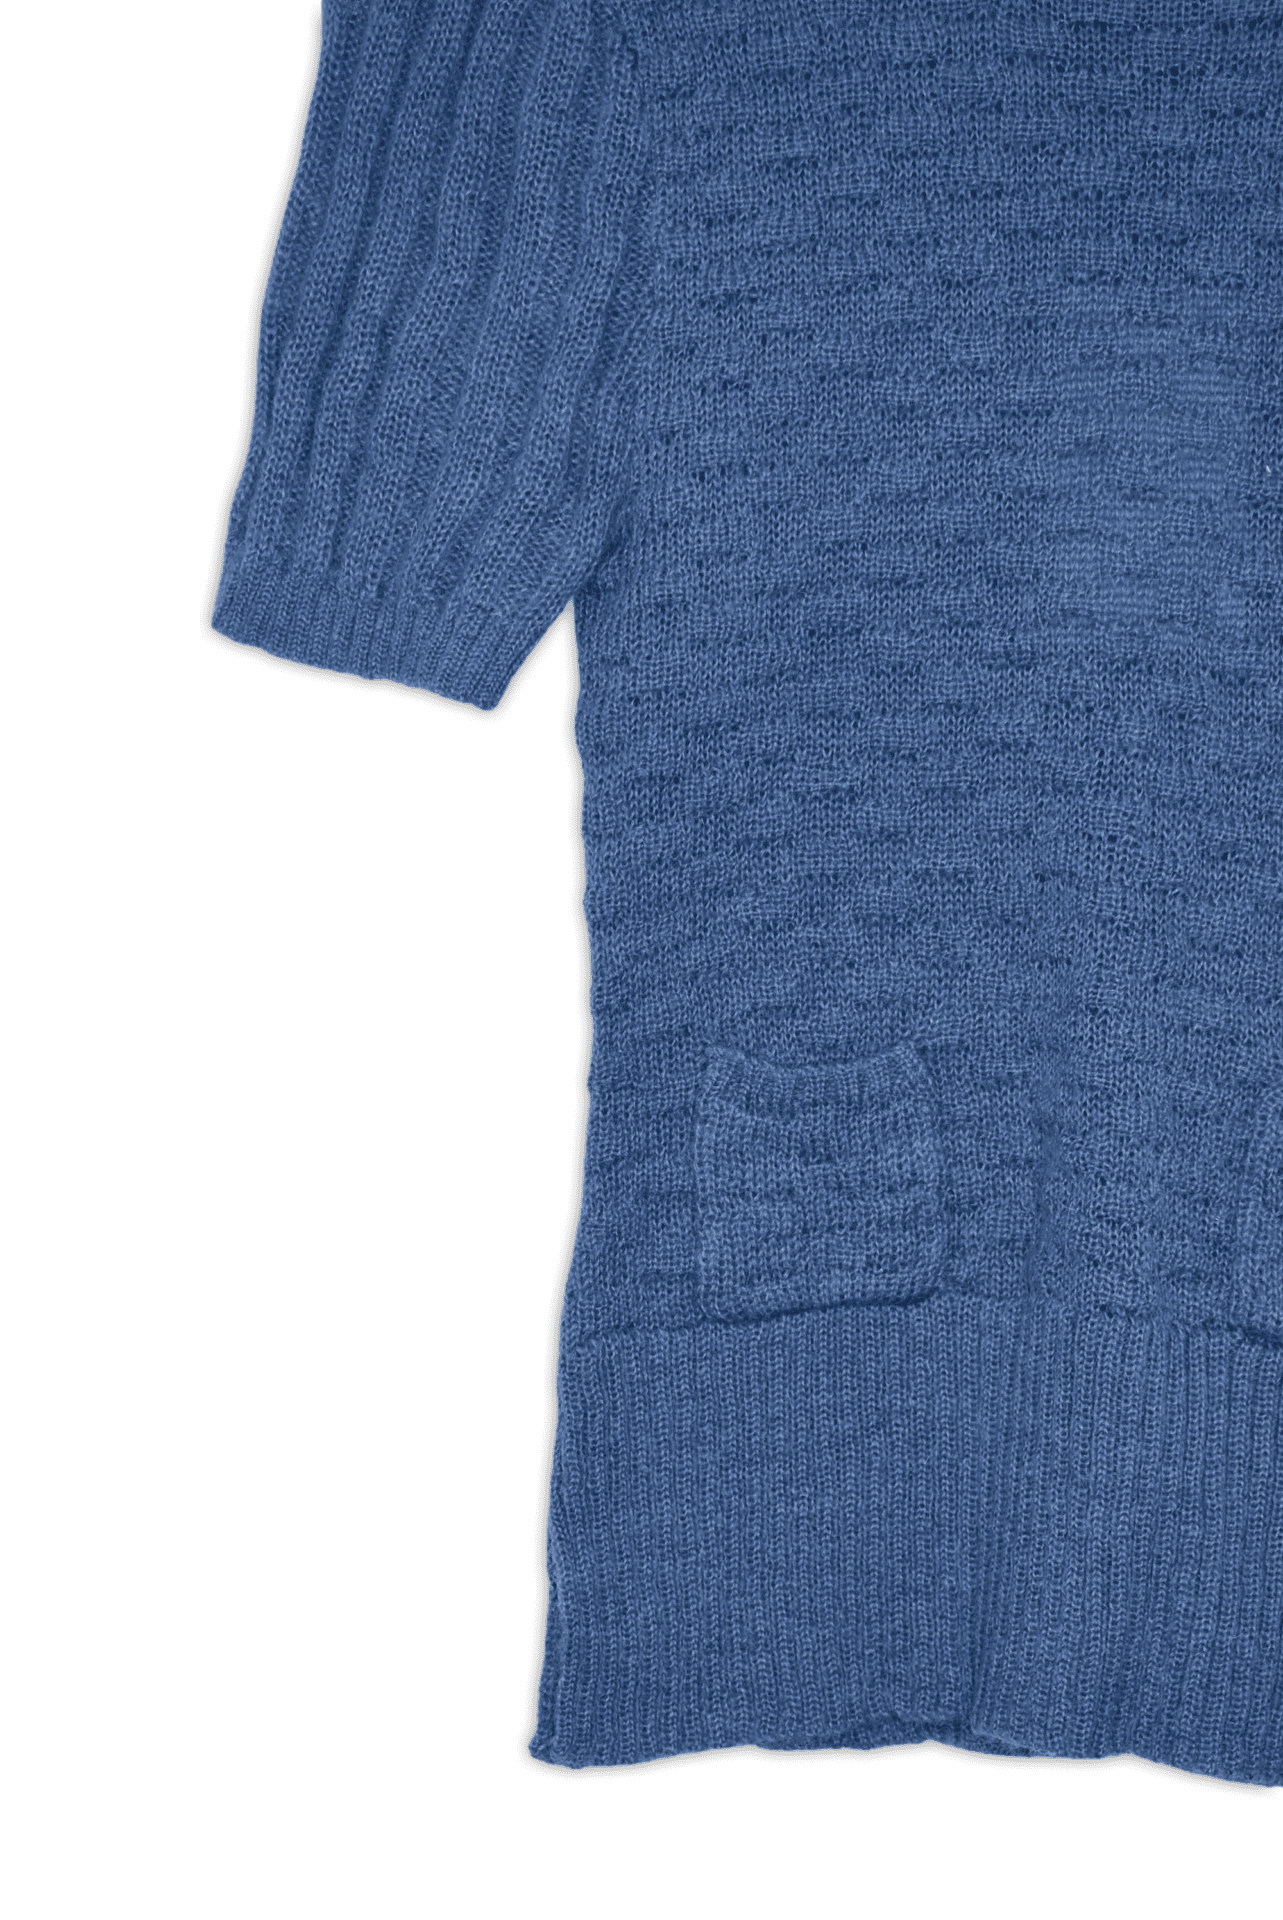 Small, blue, wool, top